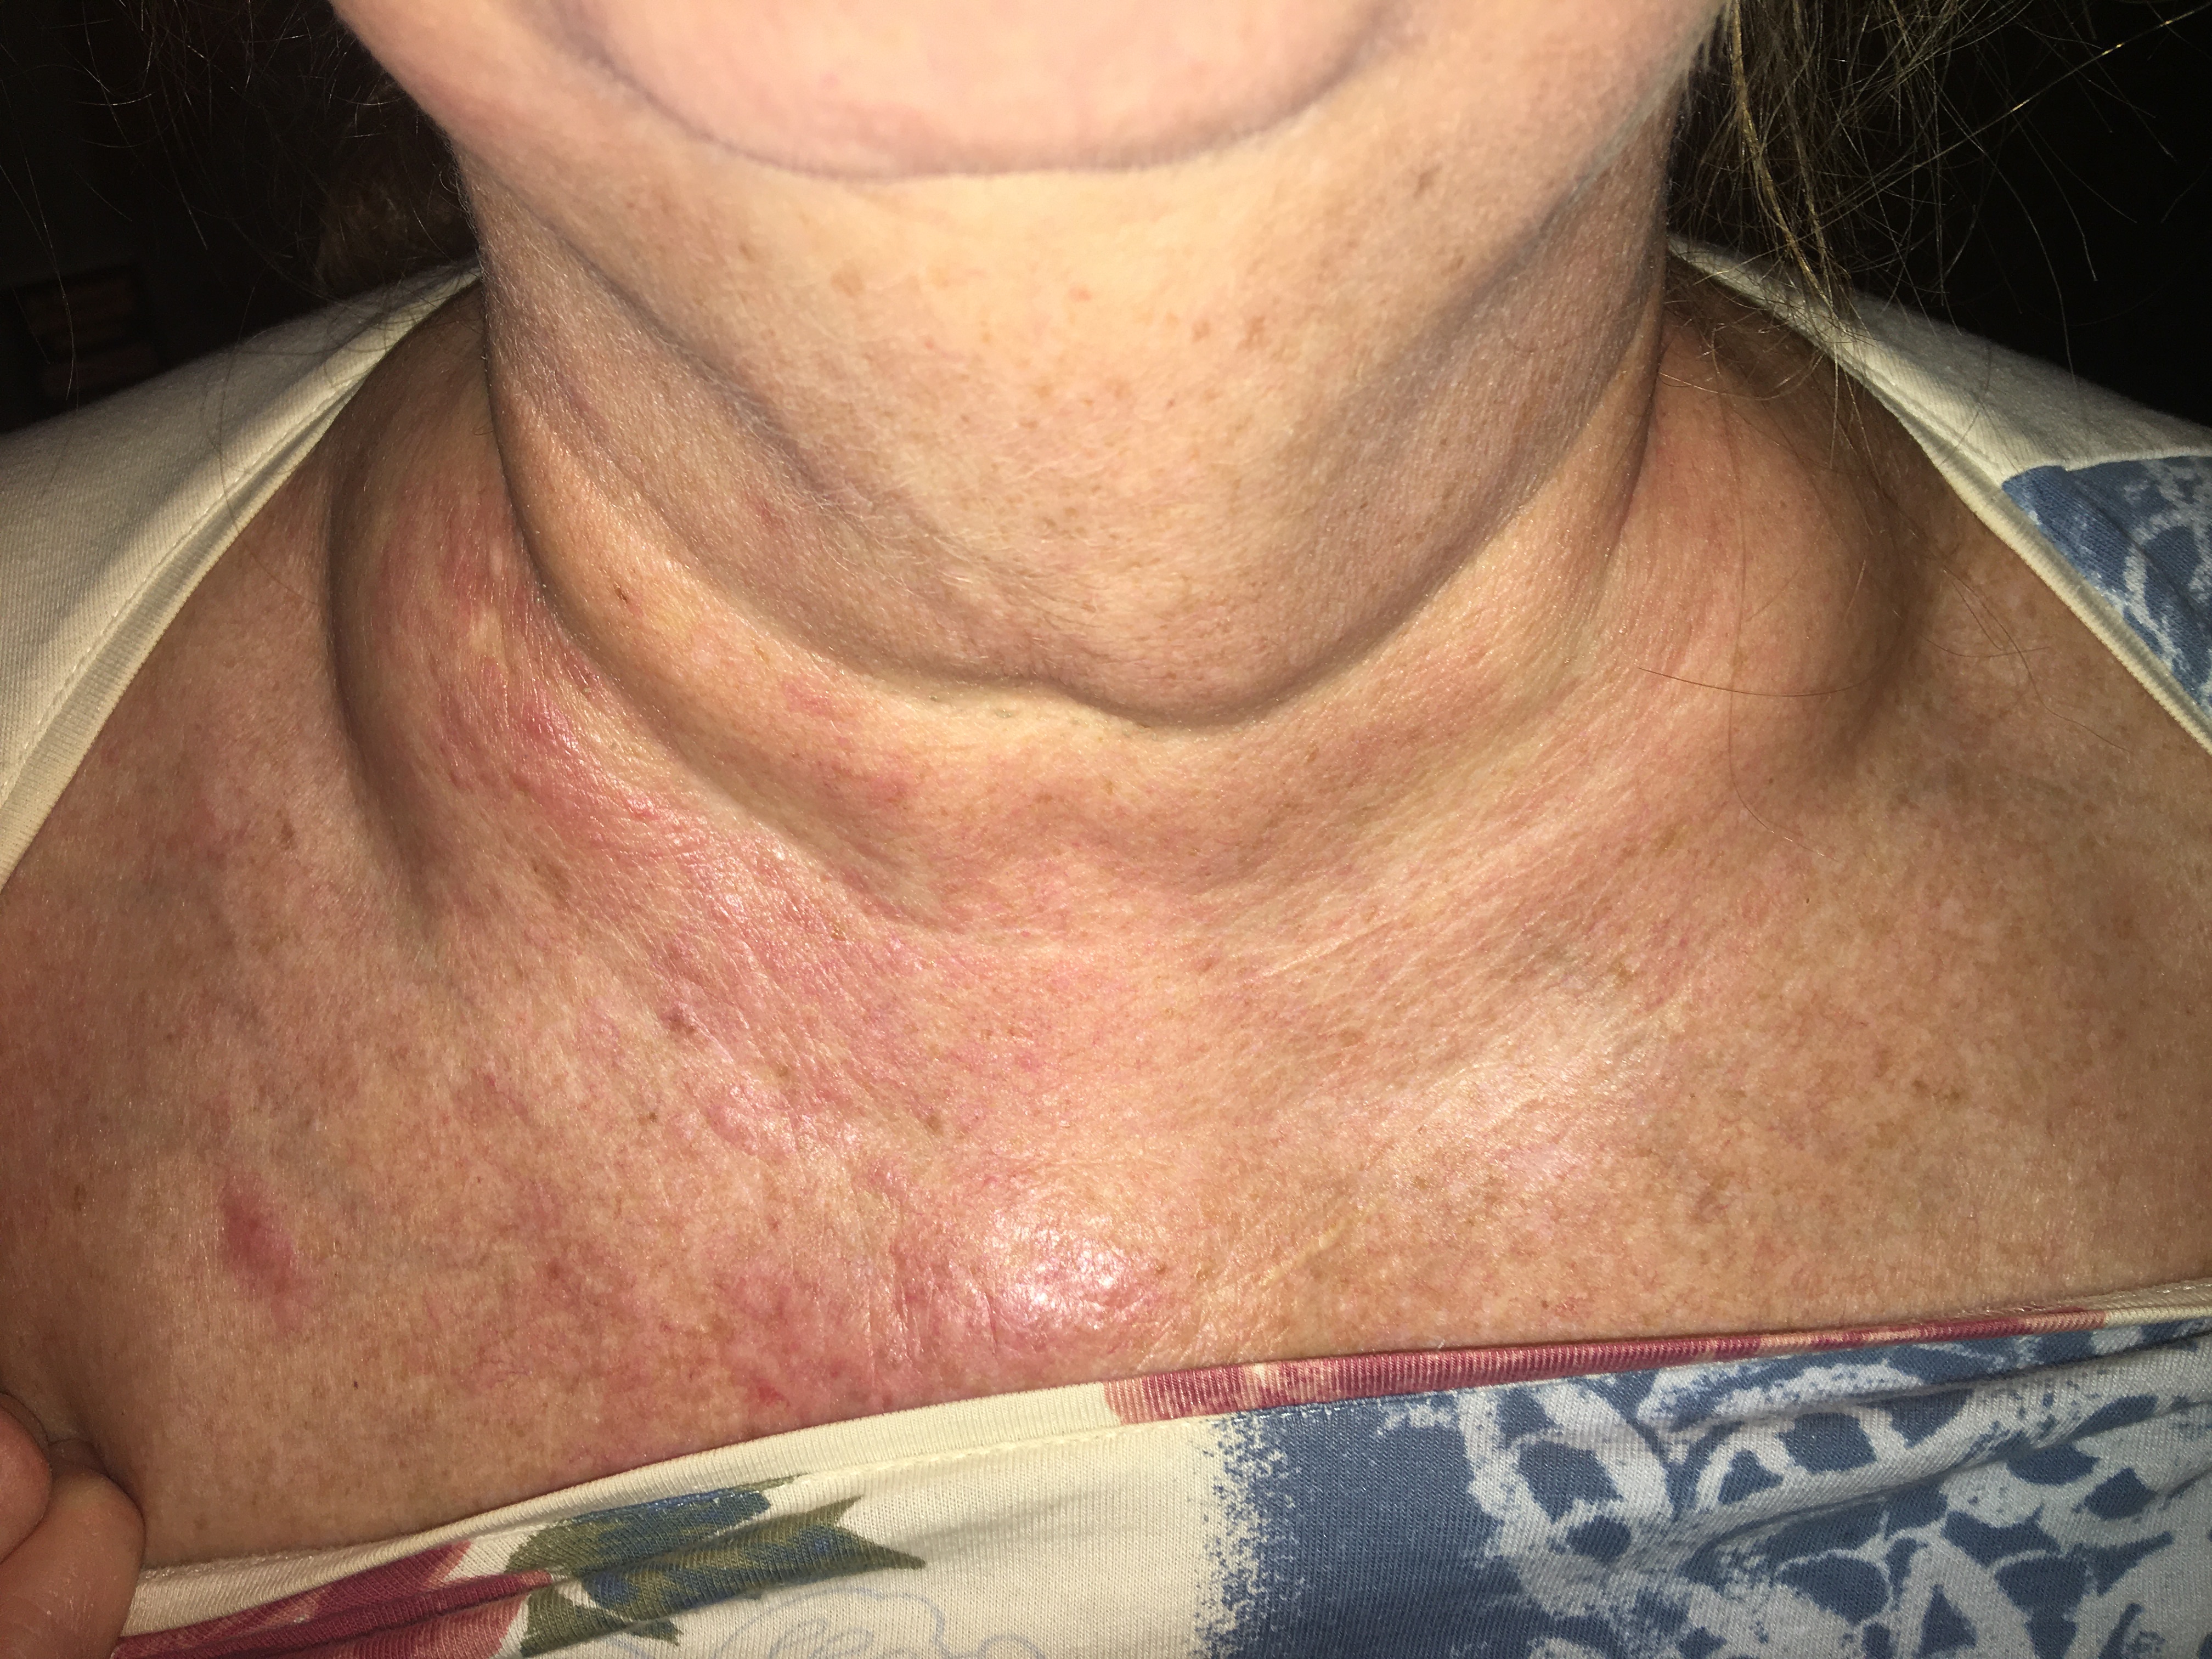 swollen supraclavicular lymph nodes due to infection